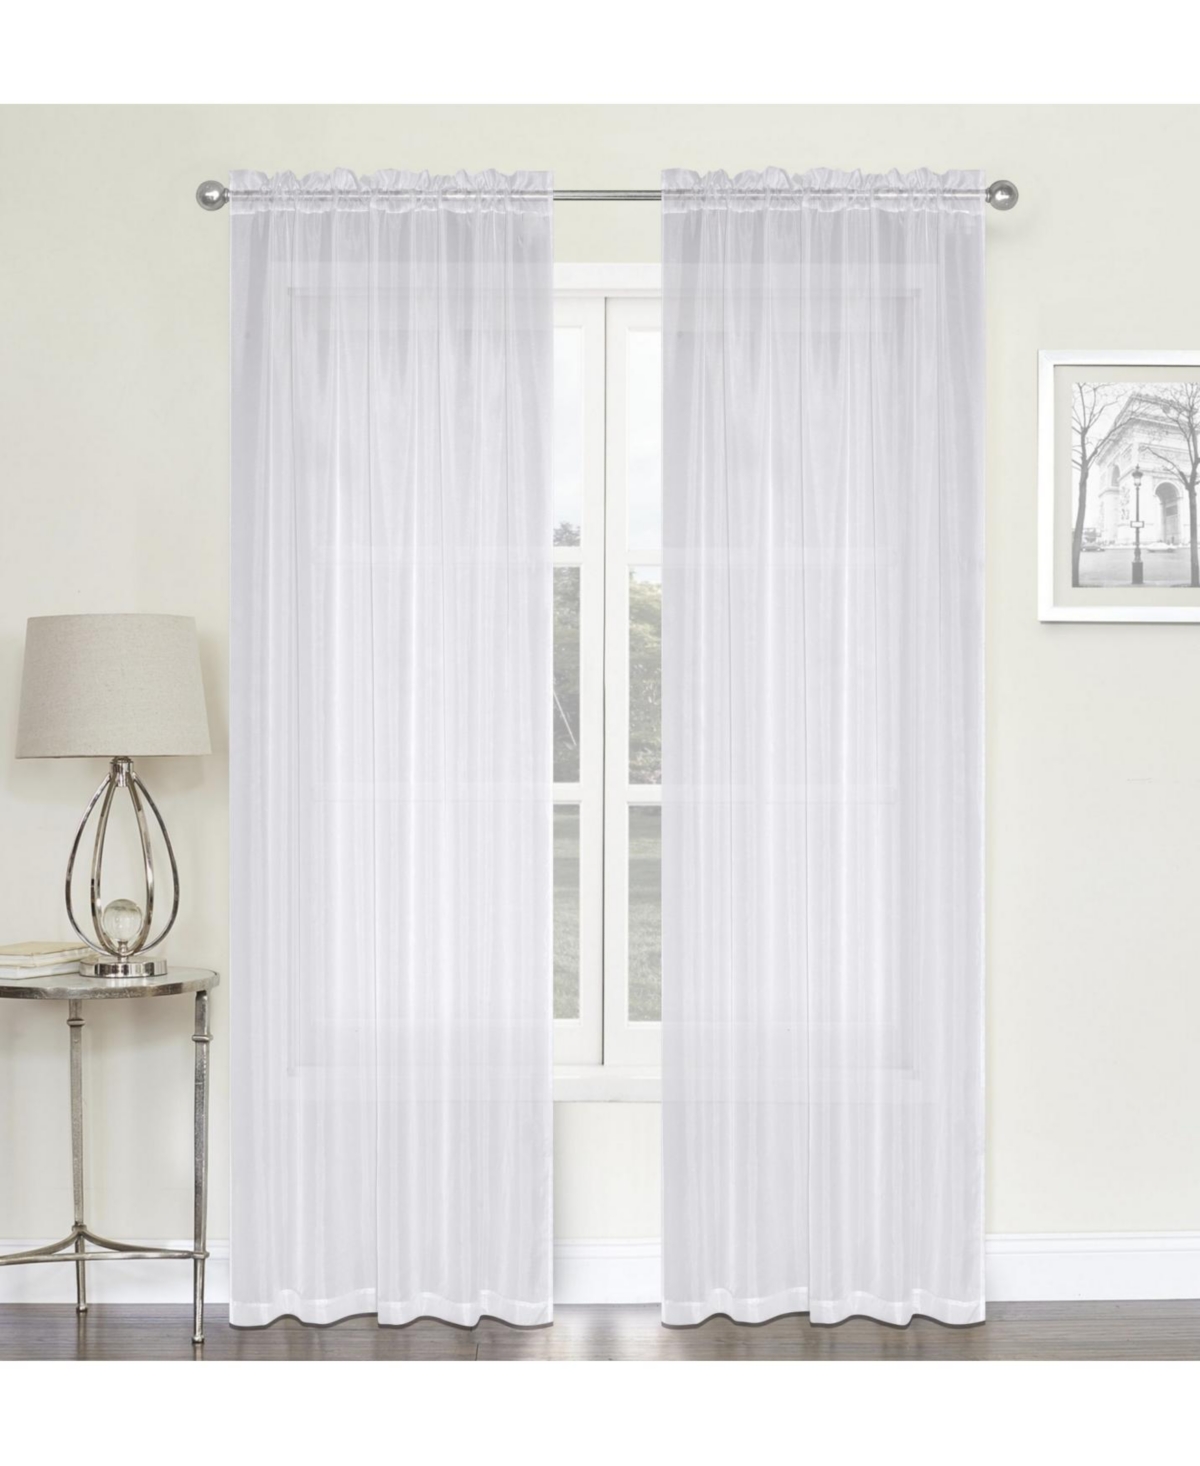 Montauk Accents Ultra Lux 2 Piece Rod Pocket White Sheer Voile Window Curtain Panels - White